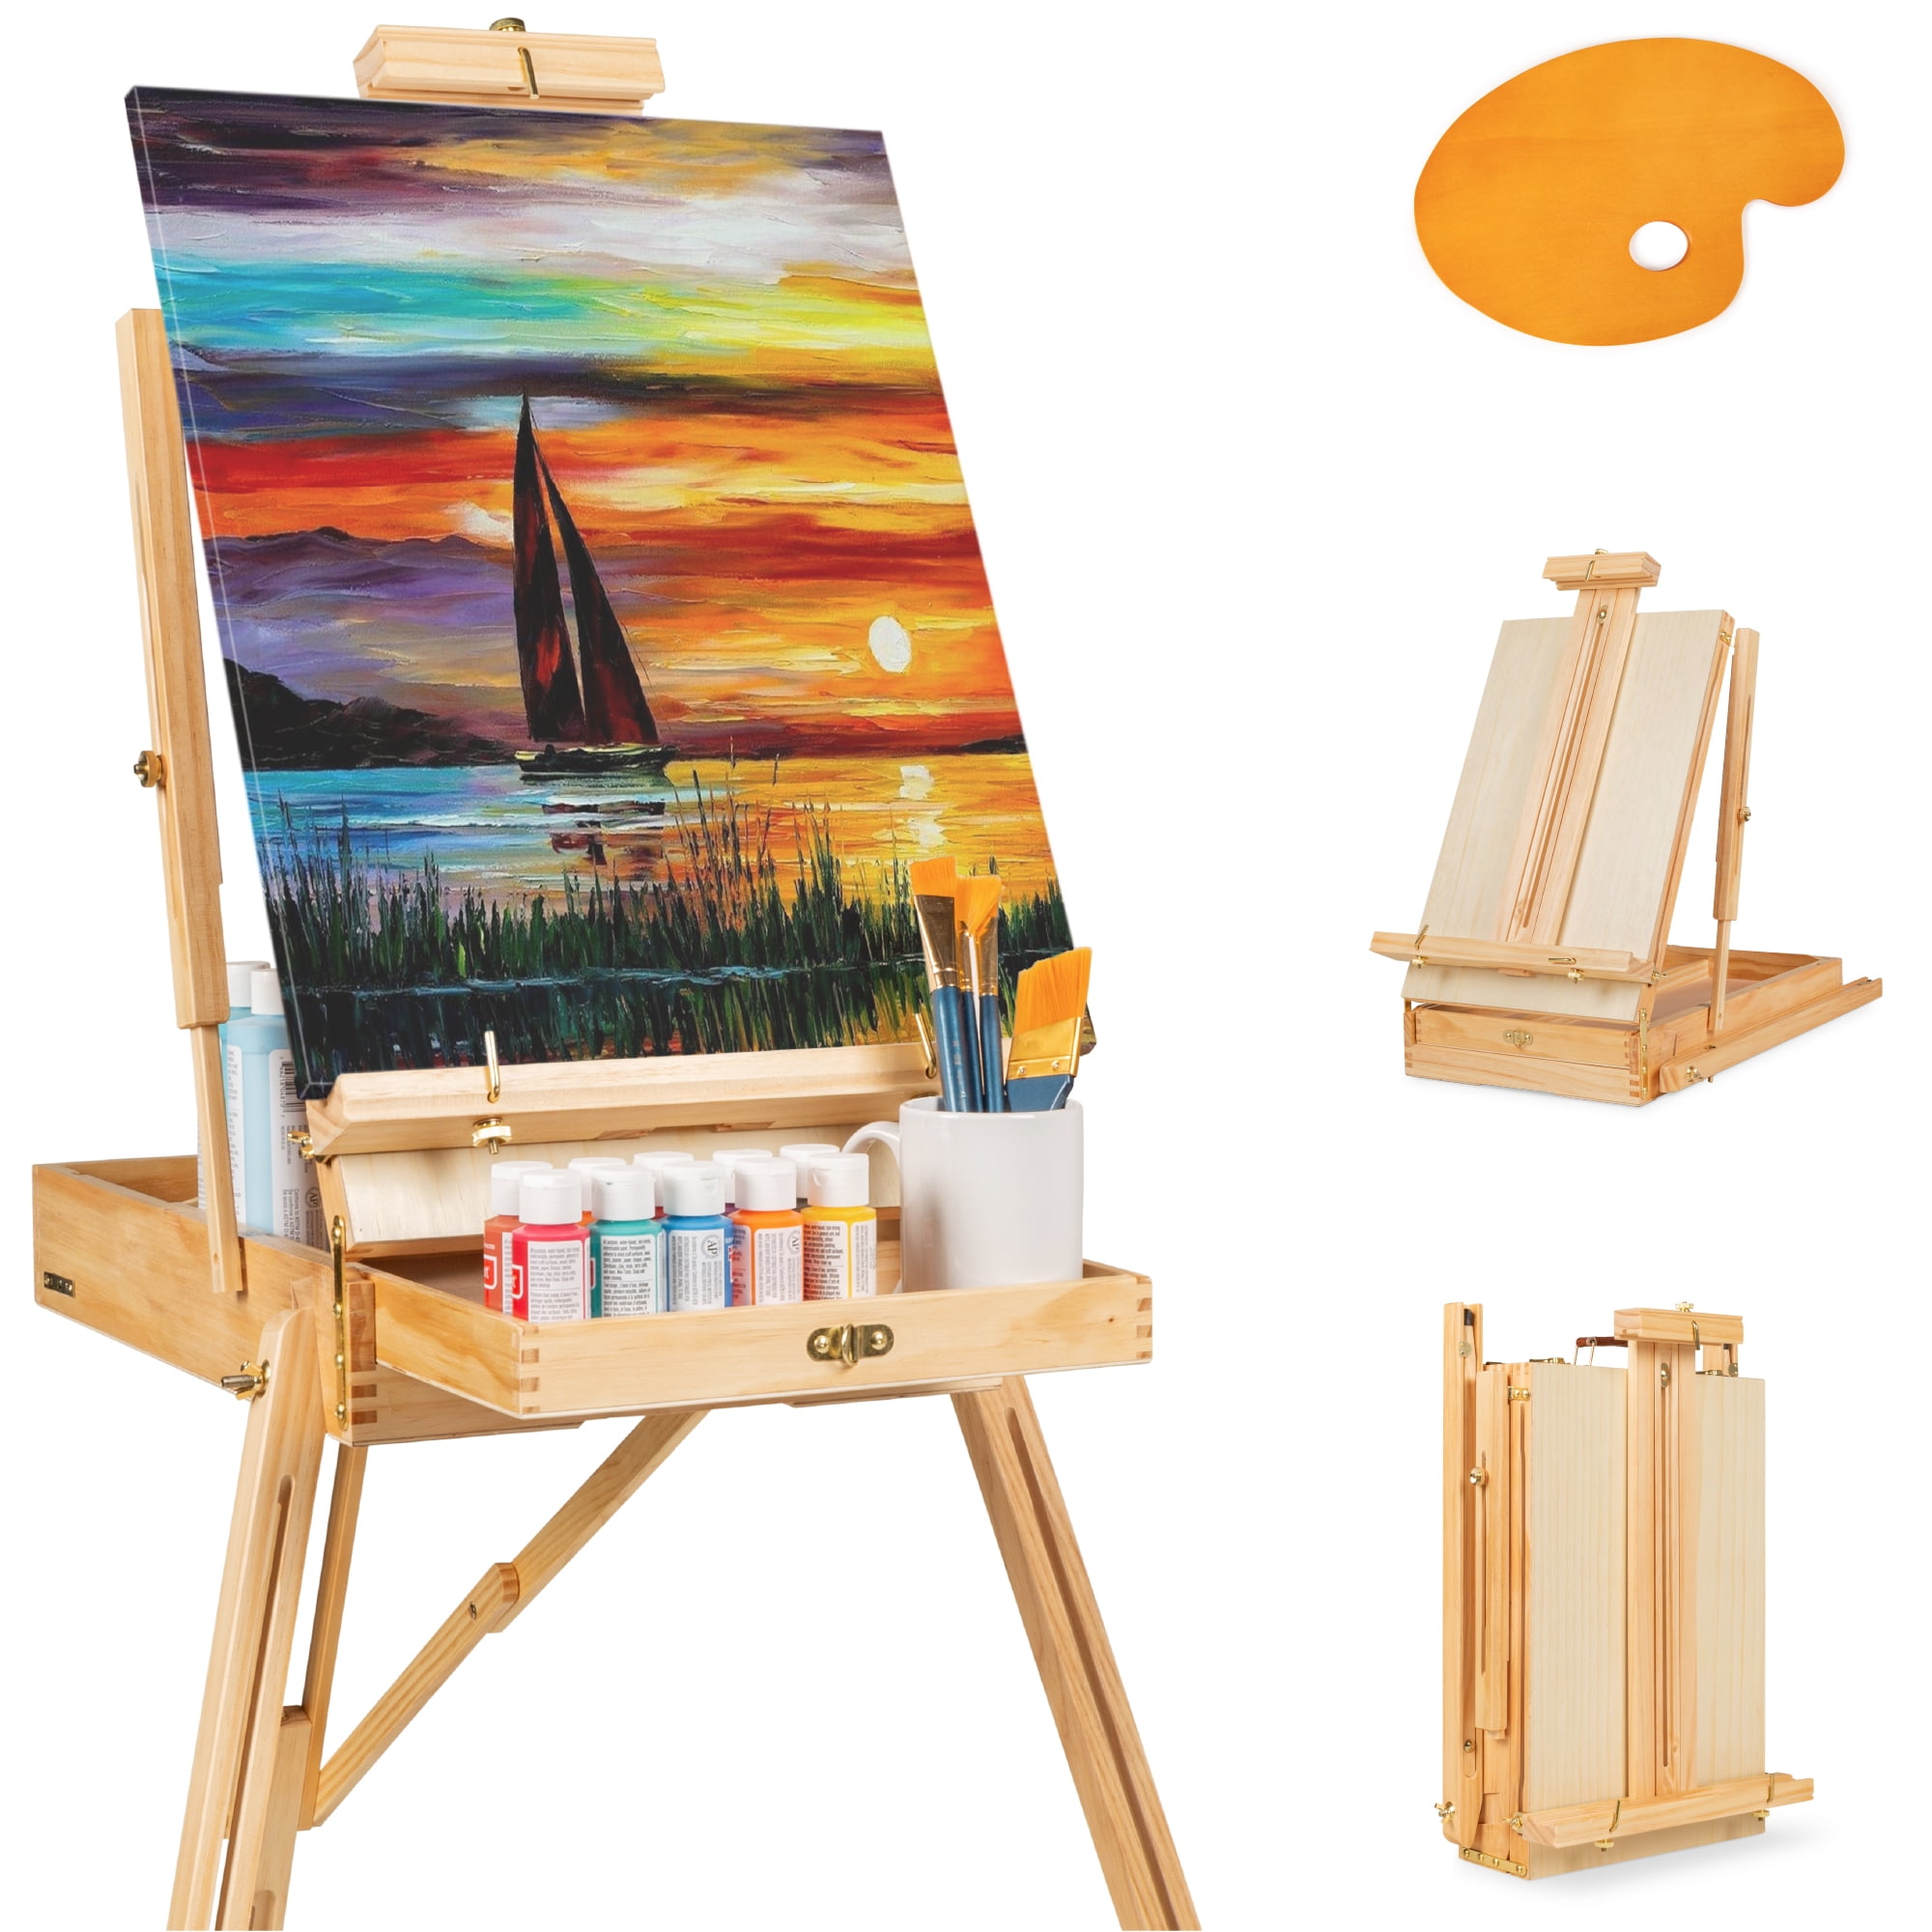 Wooden Pallete and Shoulder Strap HJ01-Q-UK1 QINUKER French Style Wooden Artist Easel & Sketchbox with Drawer Portable Art Easel for Painting